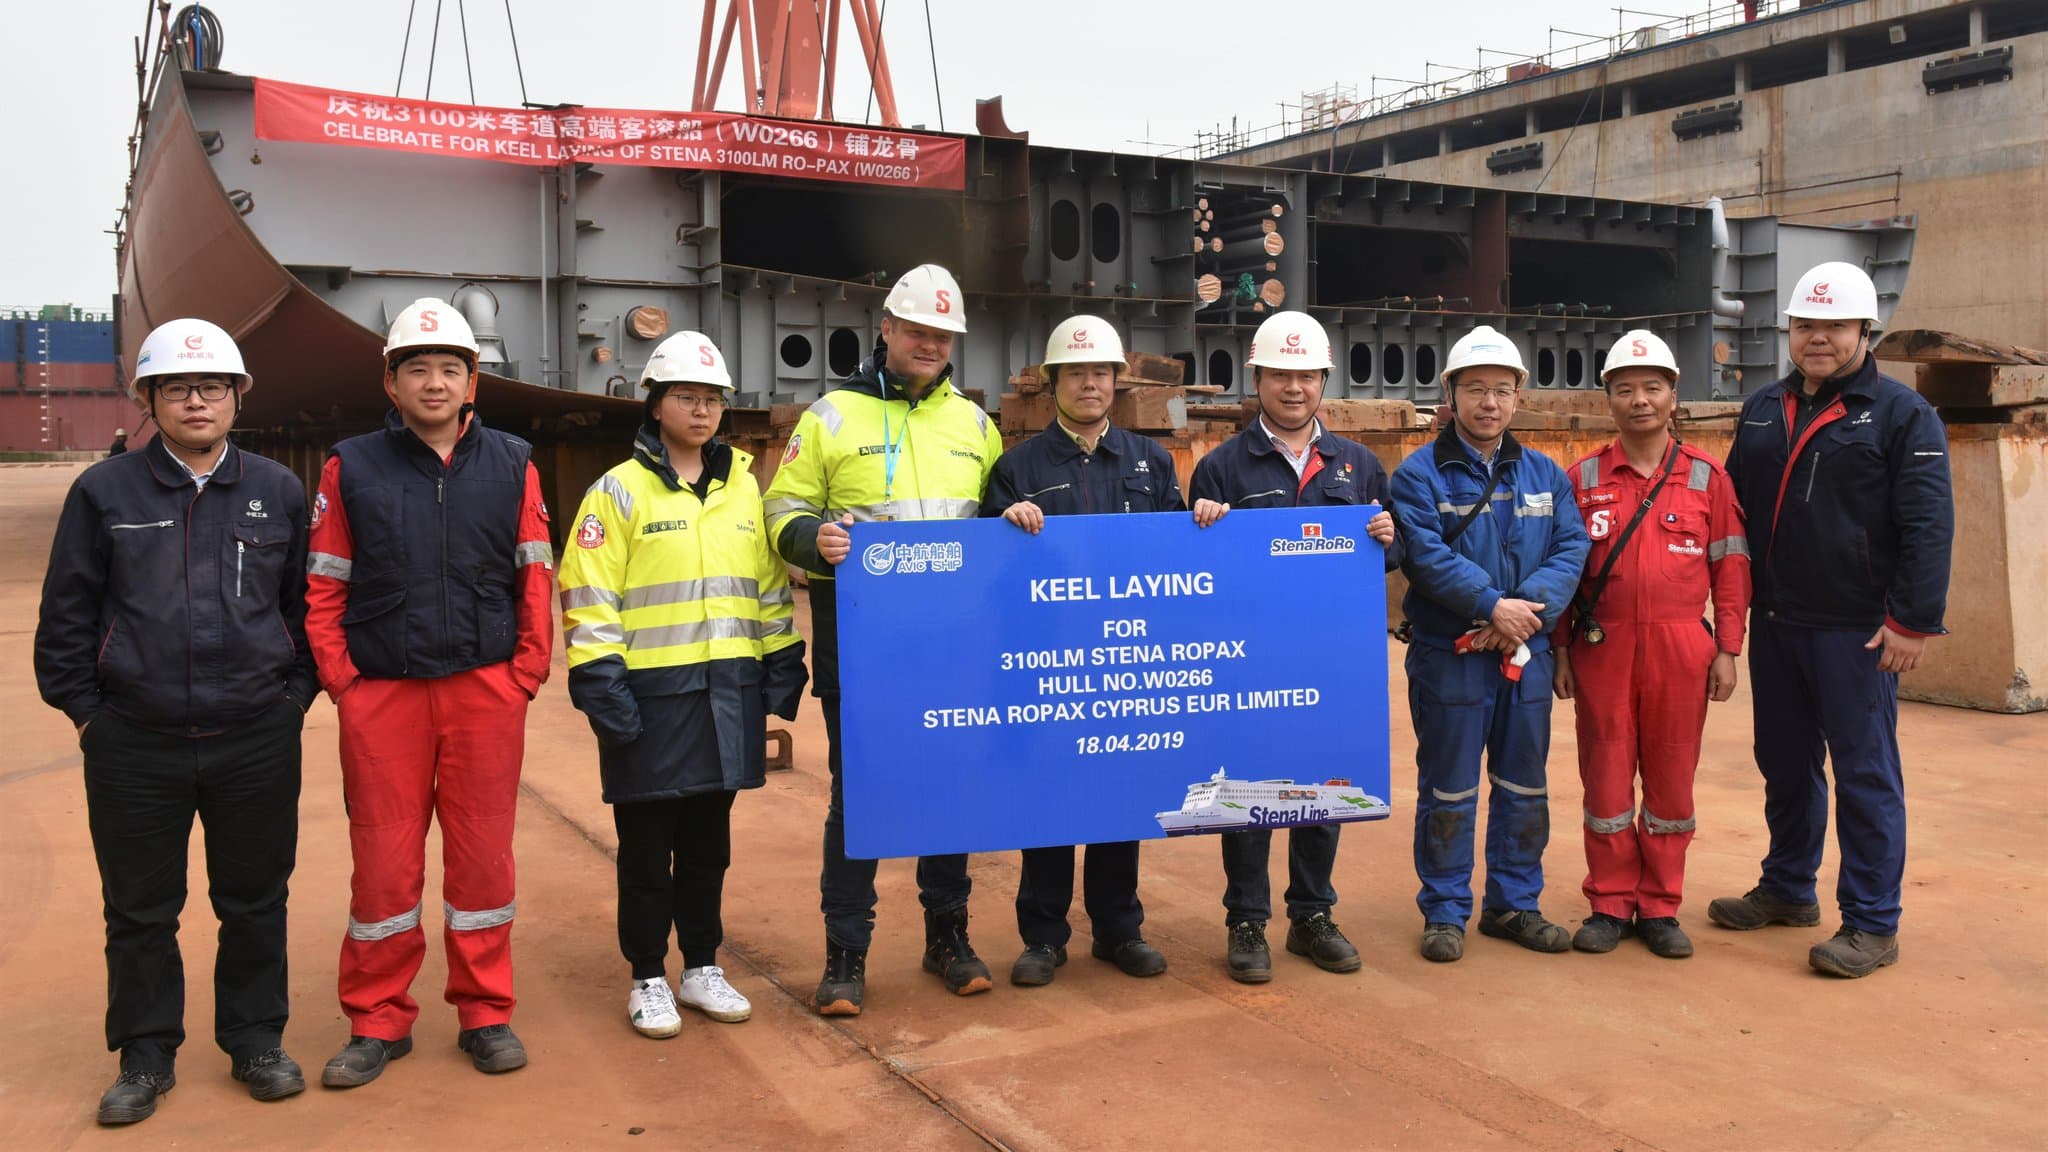 The keel-laying of the fourth Stena E-Flexer (third for Stena Line) yard number W0266, to be named STENA EMBLA. Copyright © Stena Line.